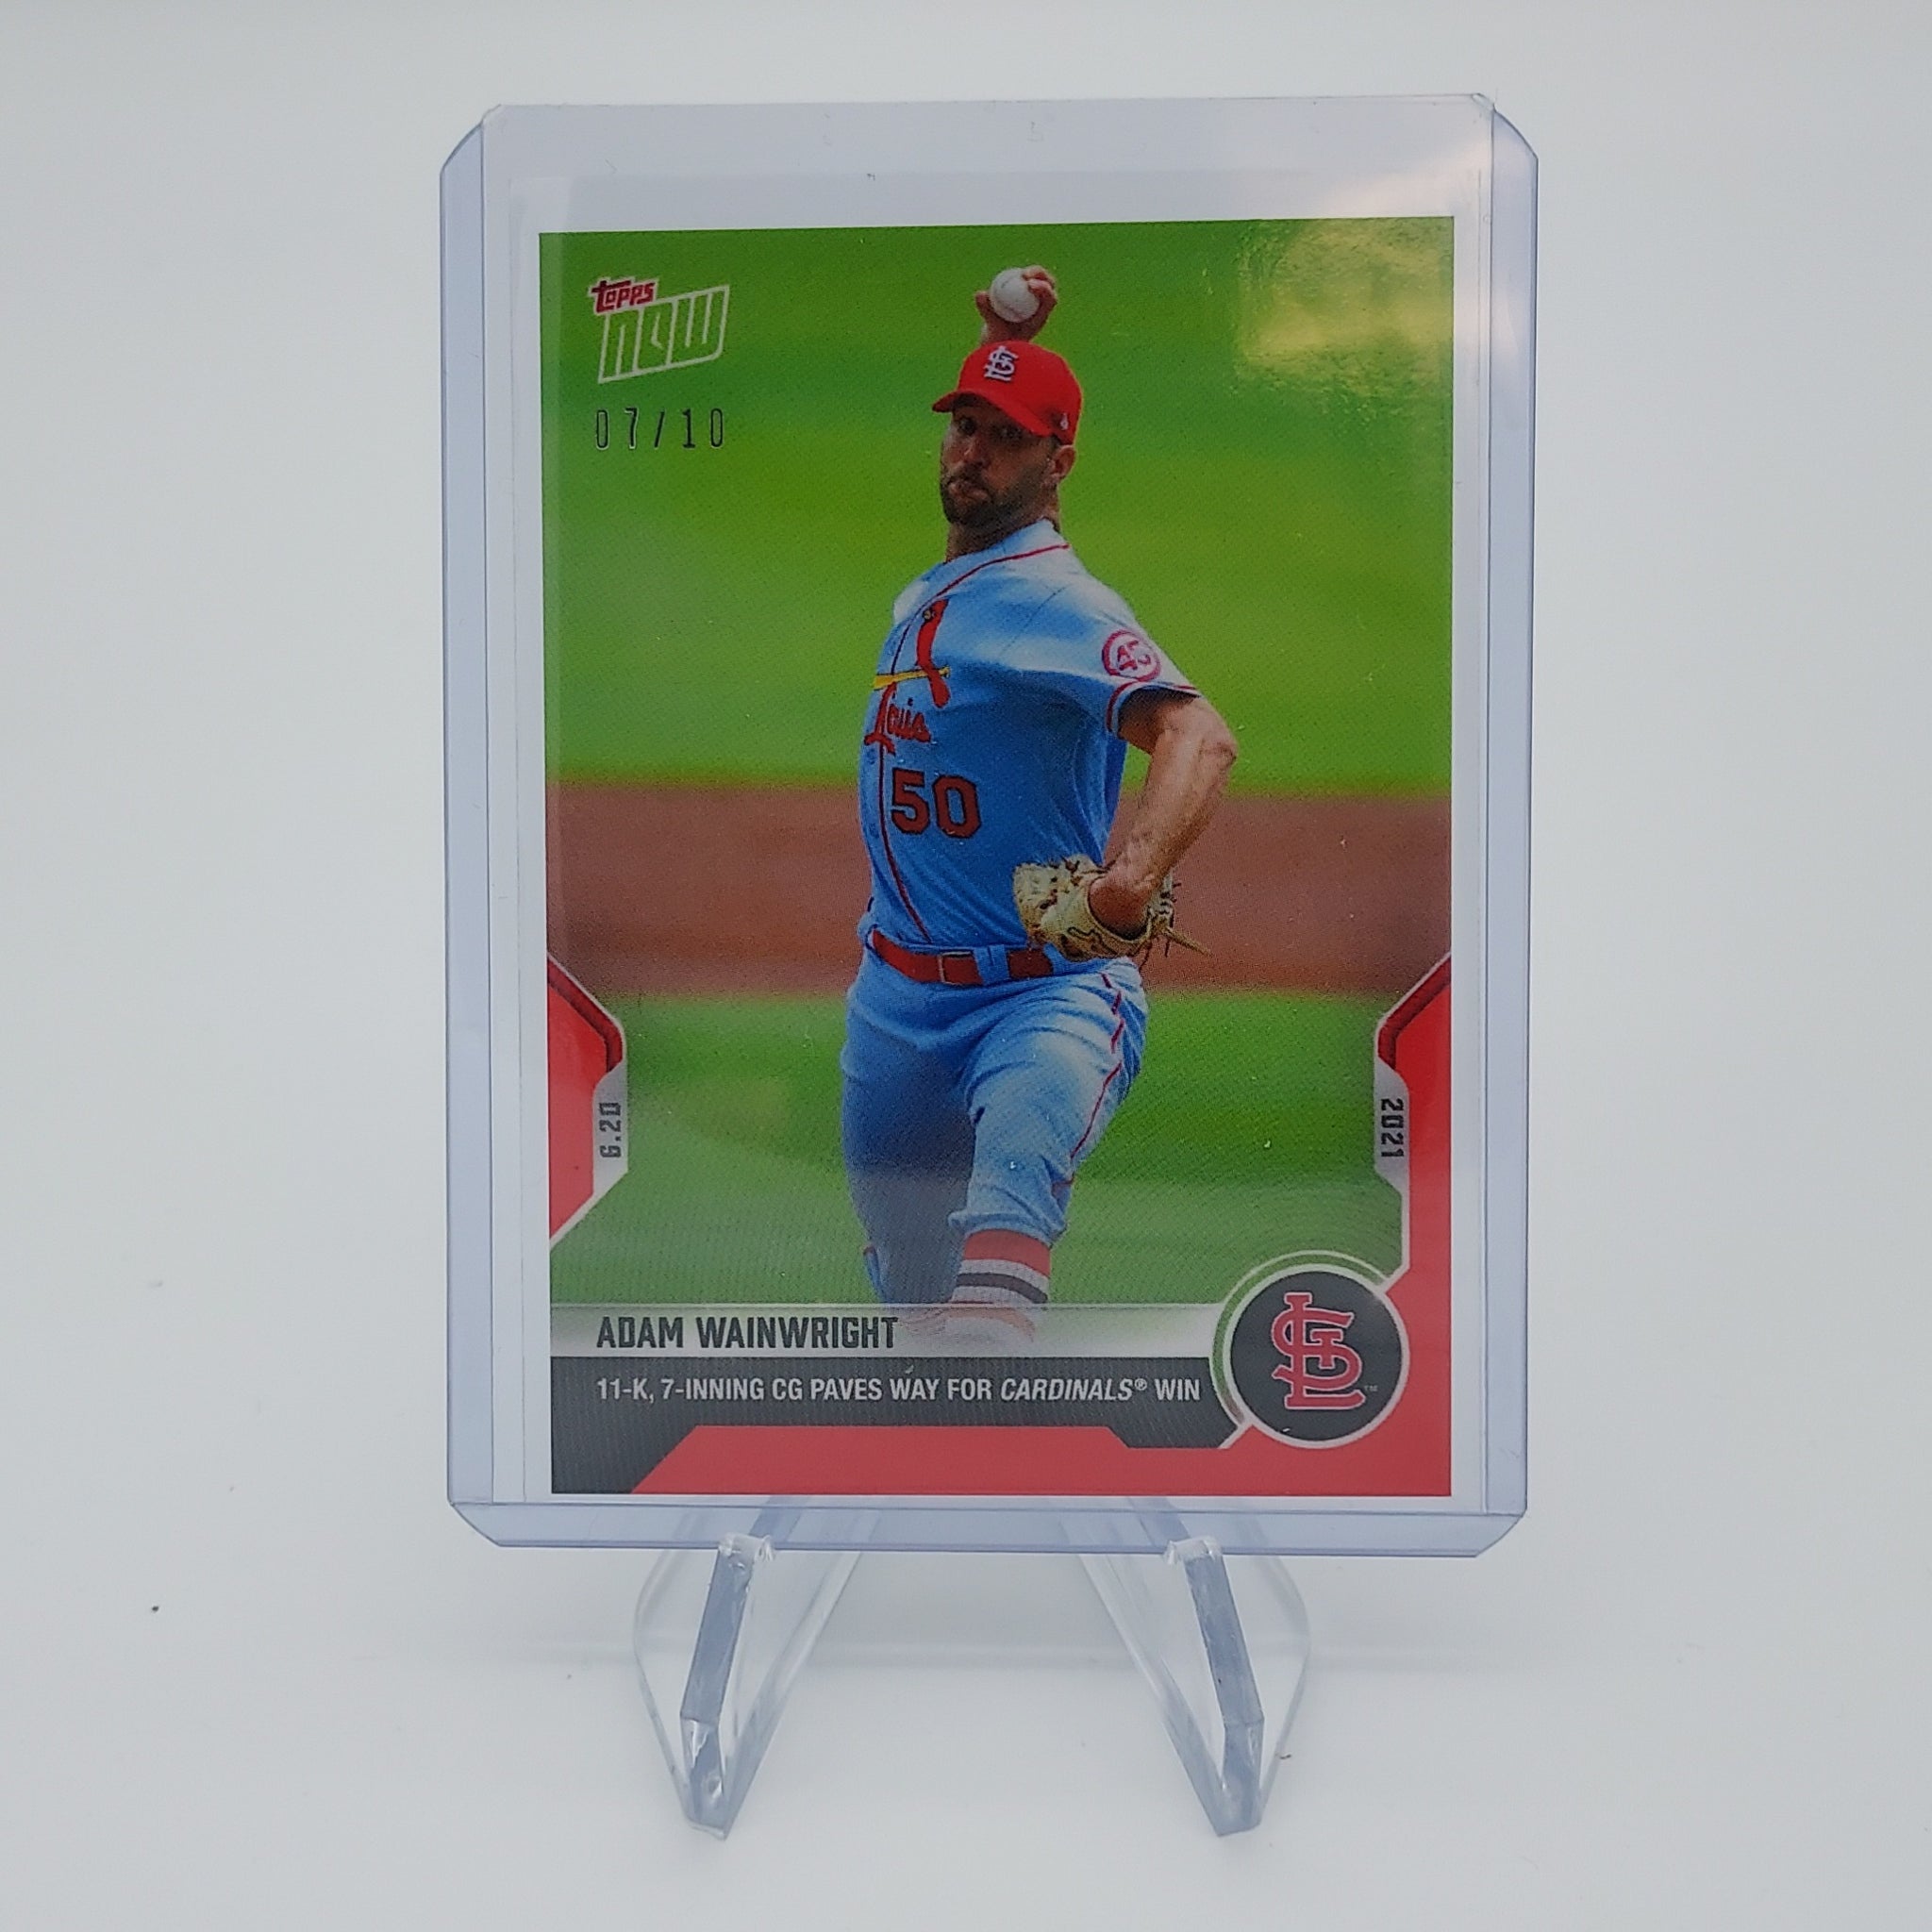 Adam Wainwright 11 K and W - 2021 MLB TOPPS NOW Card 392 - Red Parallel #7/10